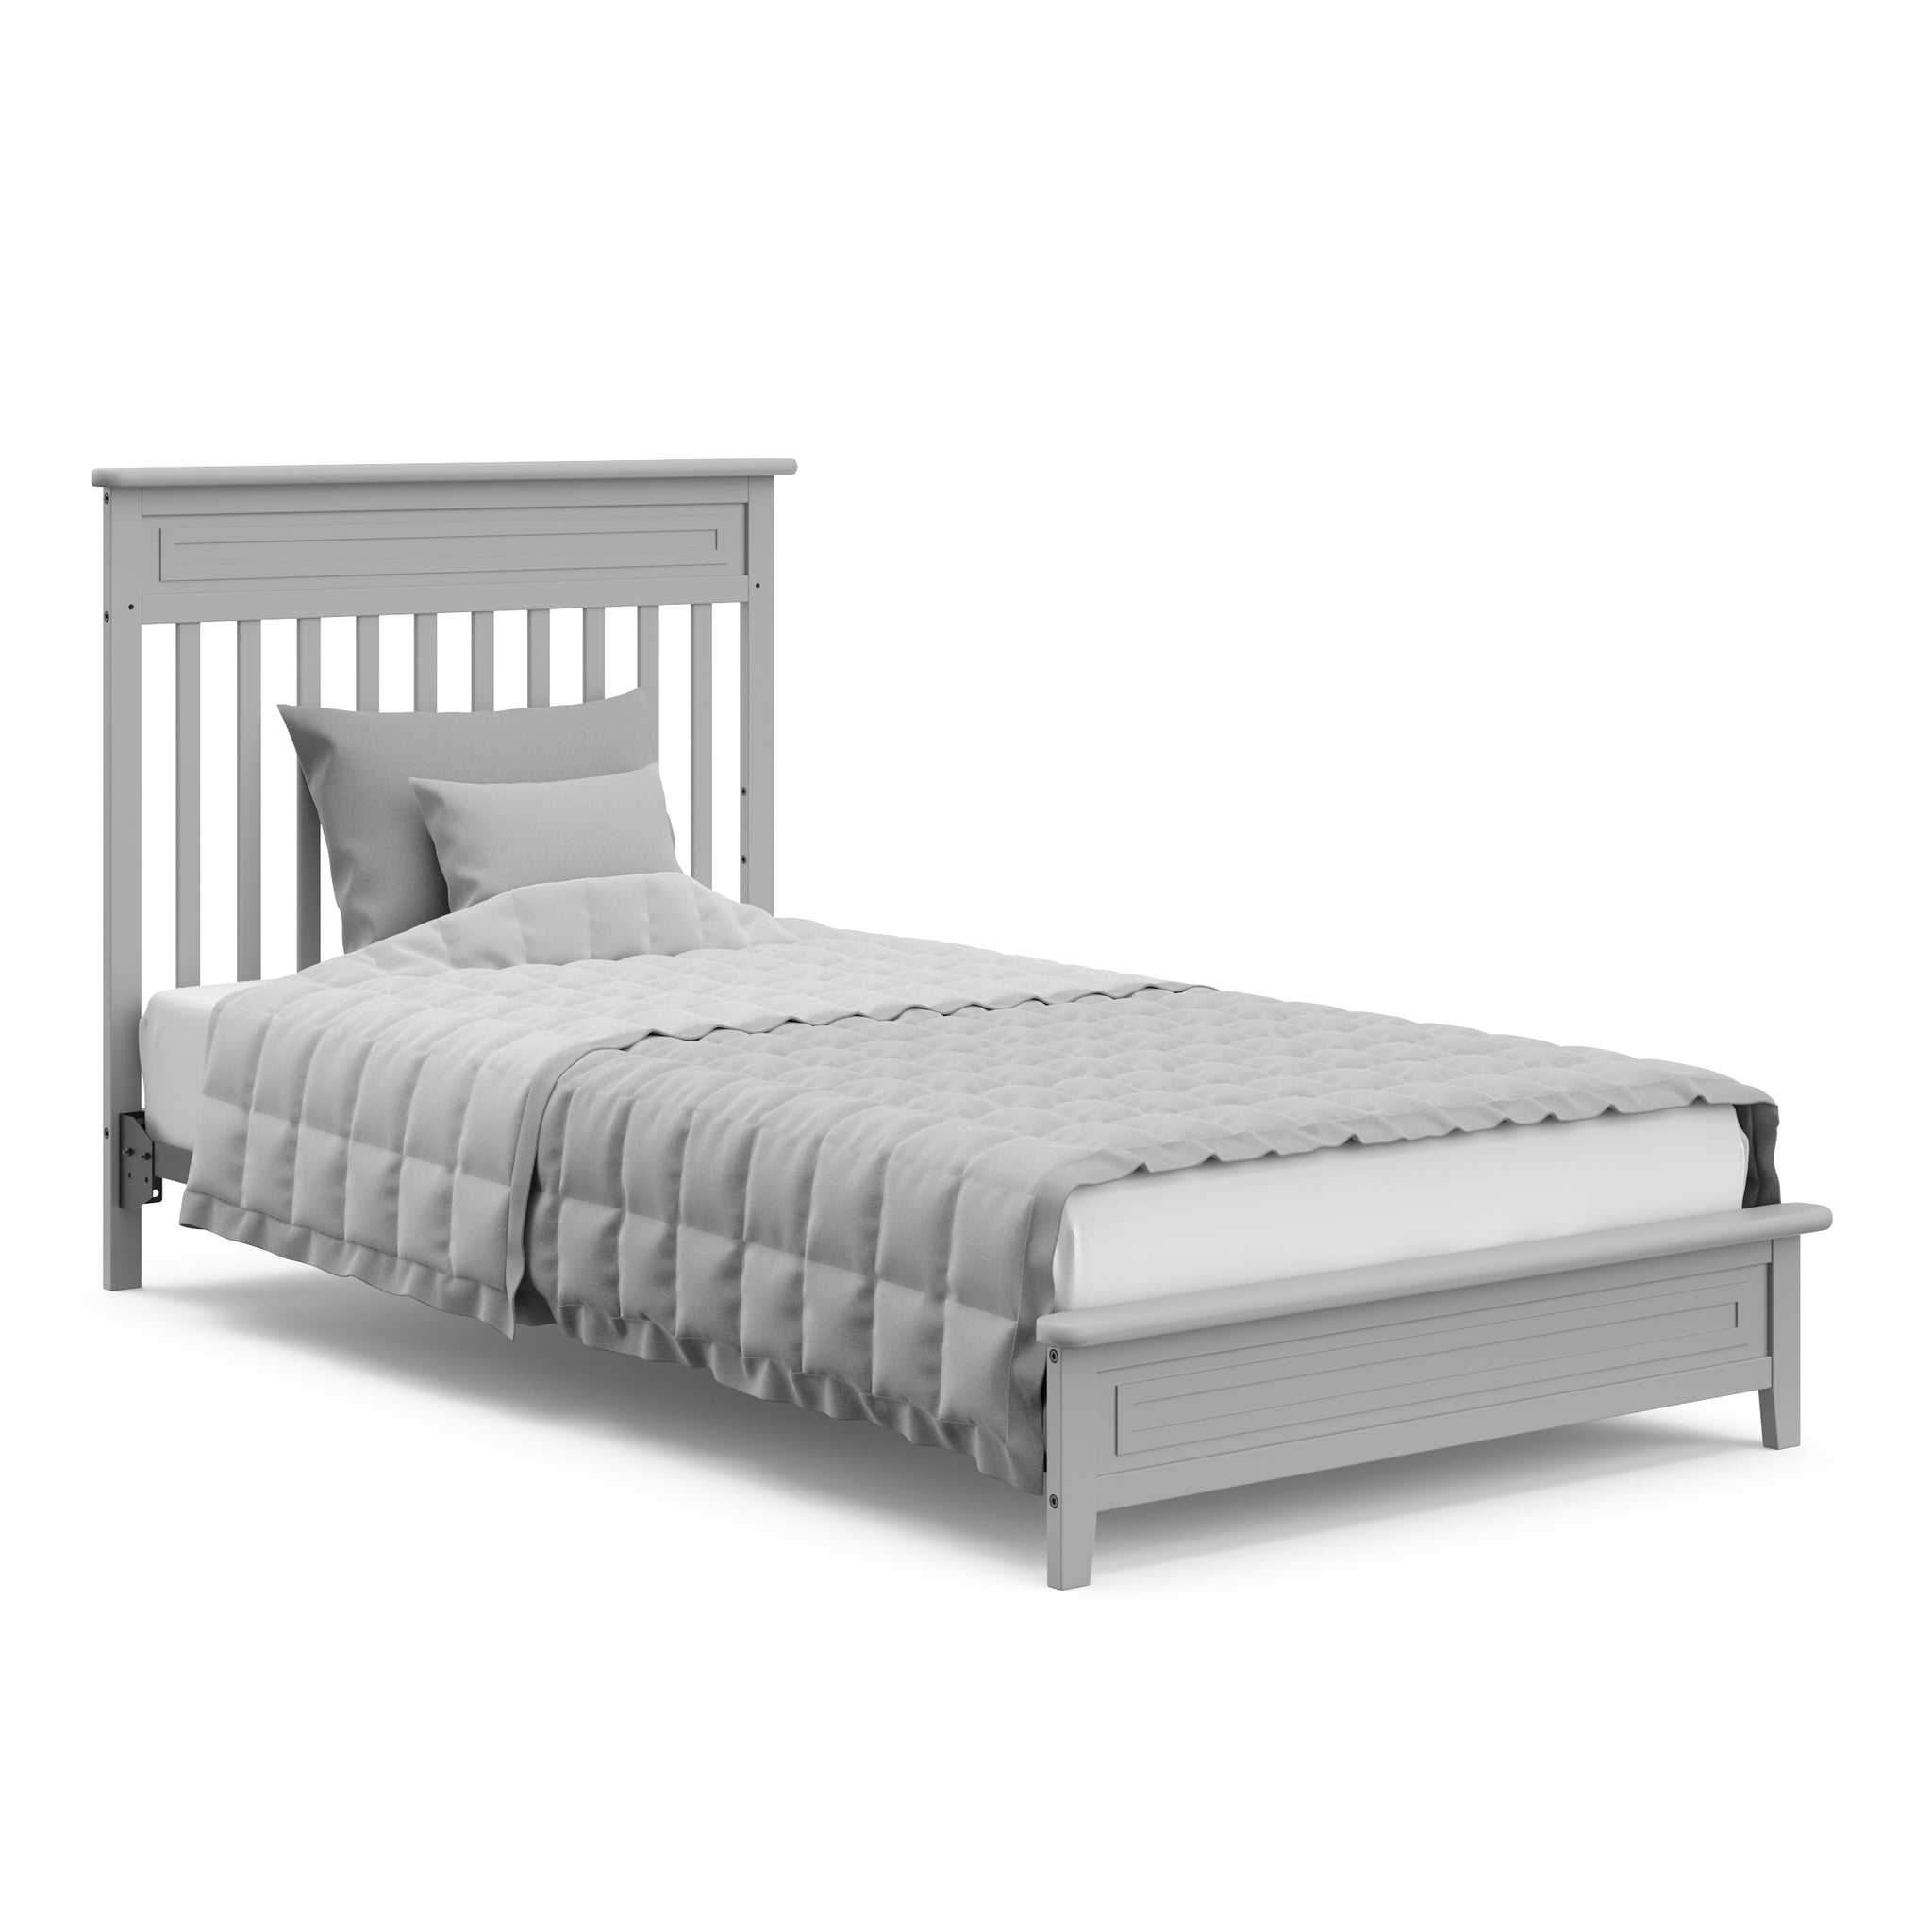 pebble gray crib in full-size bed conversion with headboard